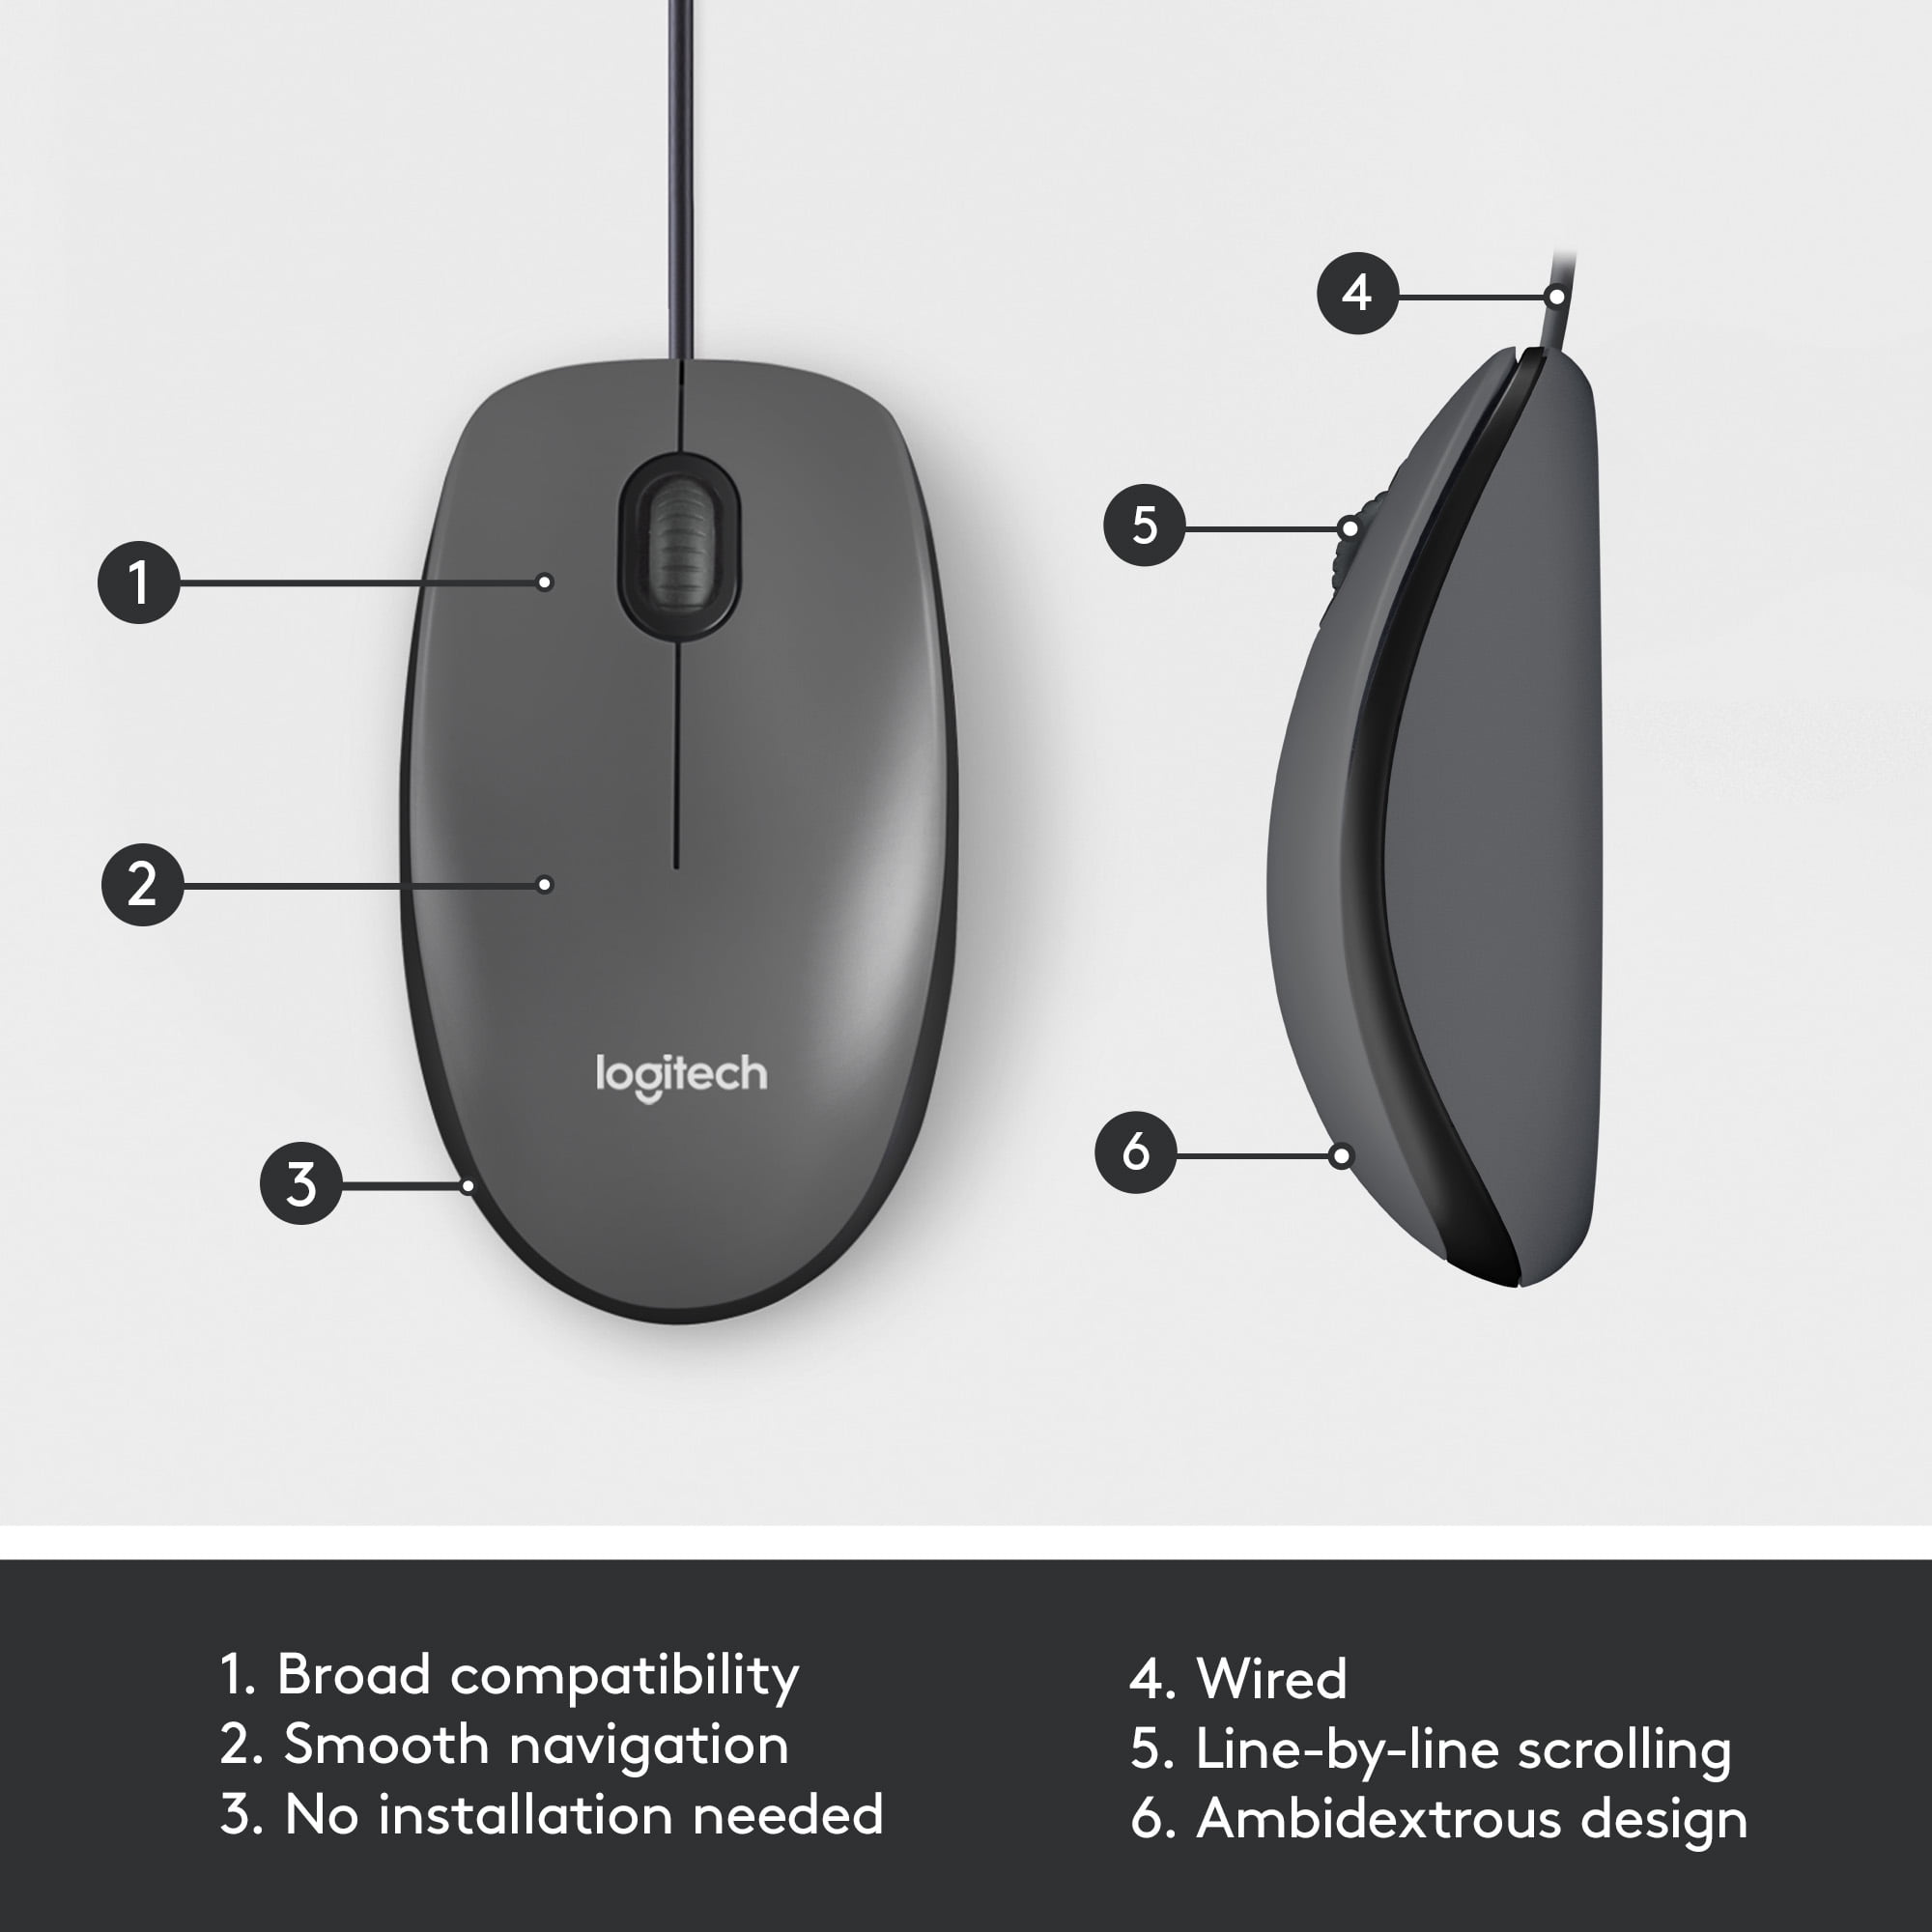 Motel behagelig For det andet Logitech M100 Wired USB Mouse, 3-Buttons,1000 DPI Optical Tracking,  Ambidextrous, Compatible with PC, Mac, Laptop, Gray - Walmart.com